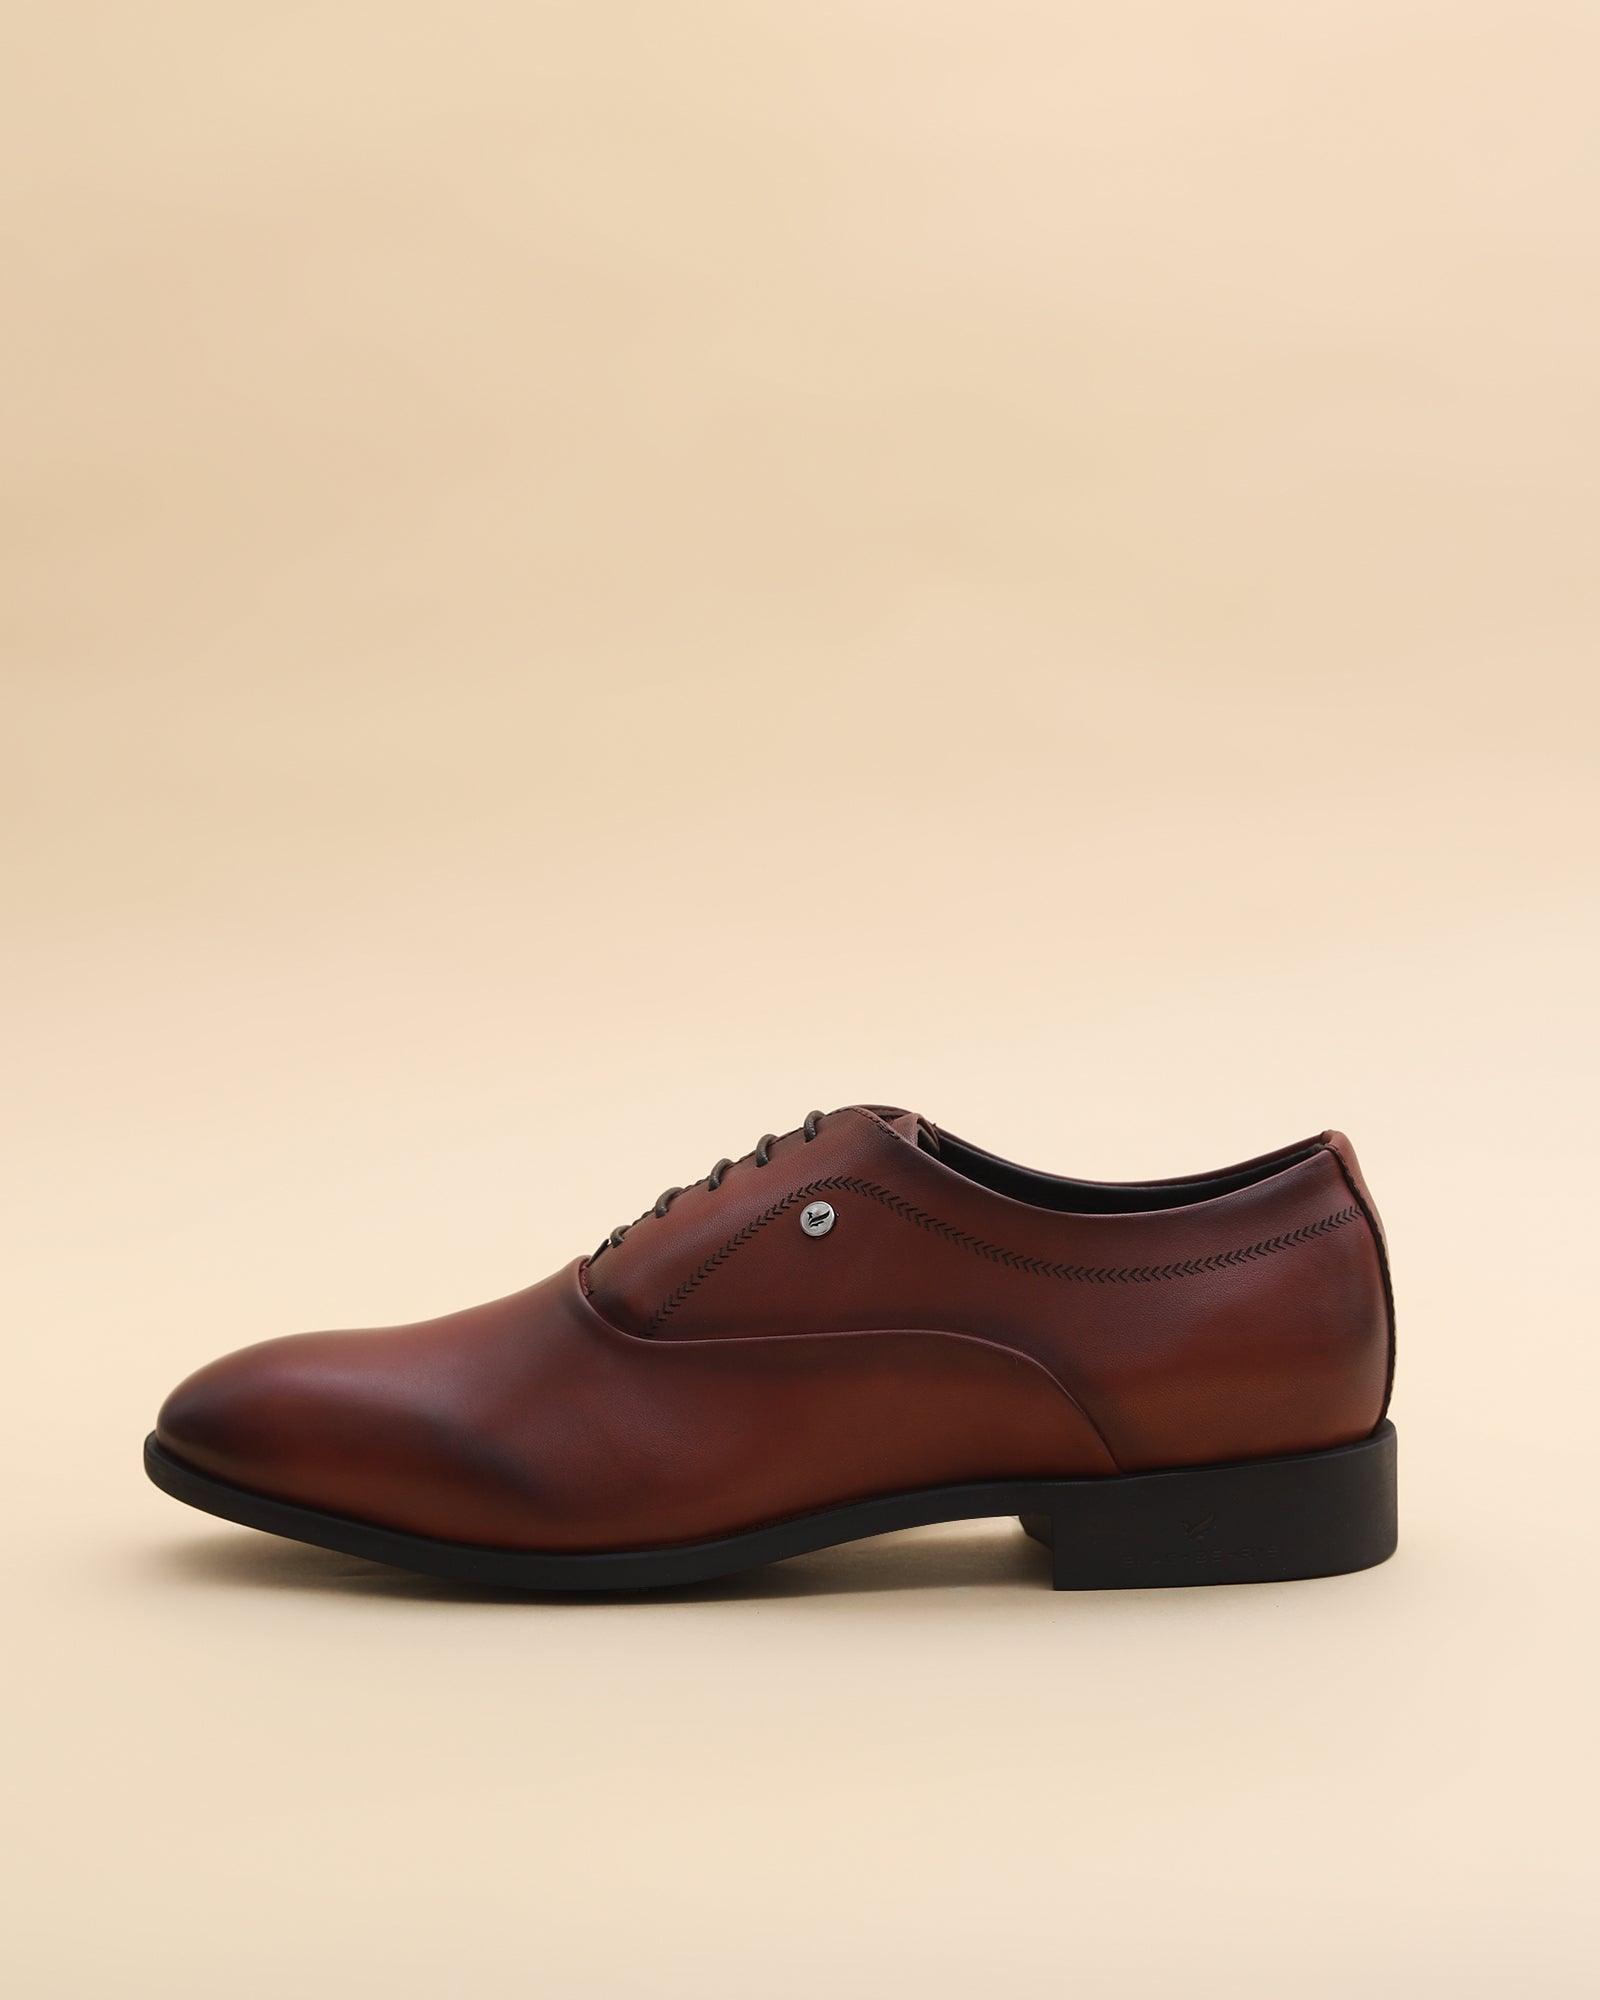 leather-burgandy-solid-oxford-shoes---lebum